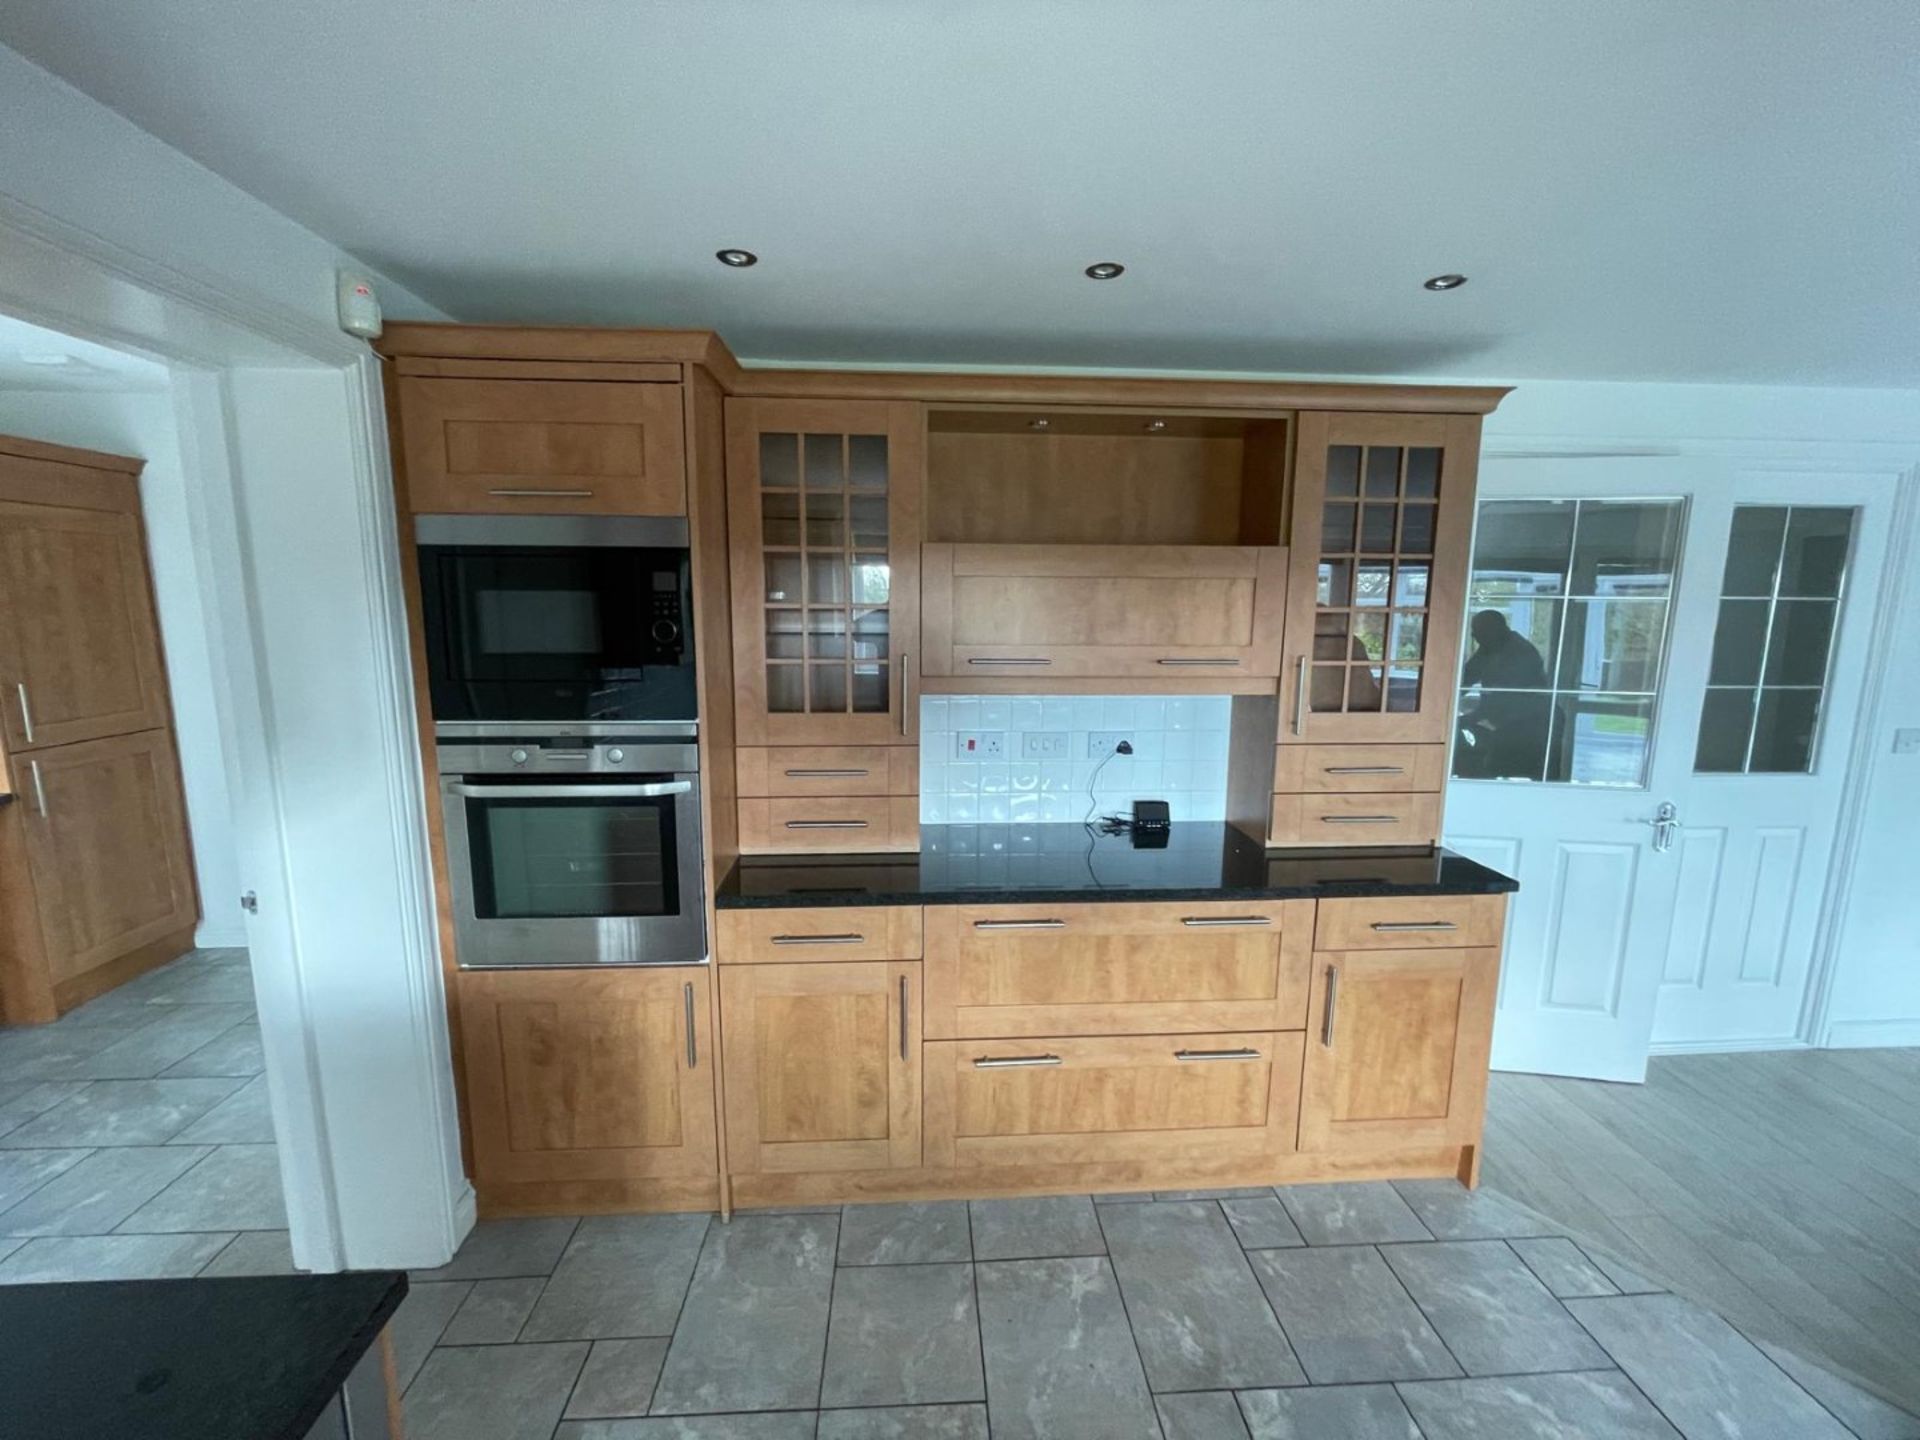 1 x Shaker-style, Feature-rich Fitted Kitchen with Solid Wood Doors, Granite Worktops and Appliances - Image 55 of 111